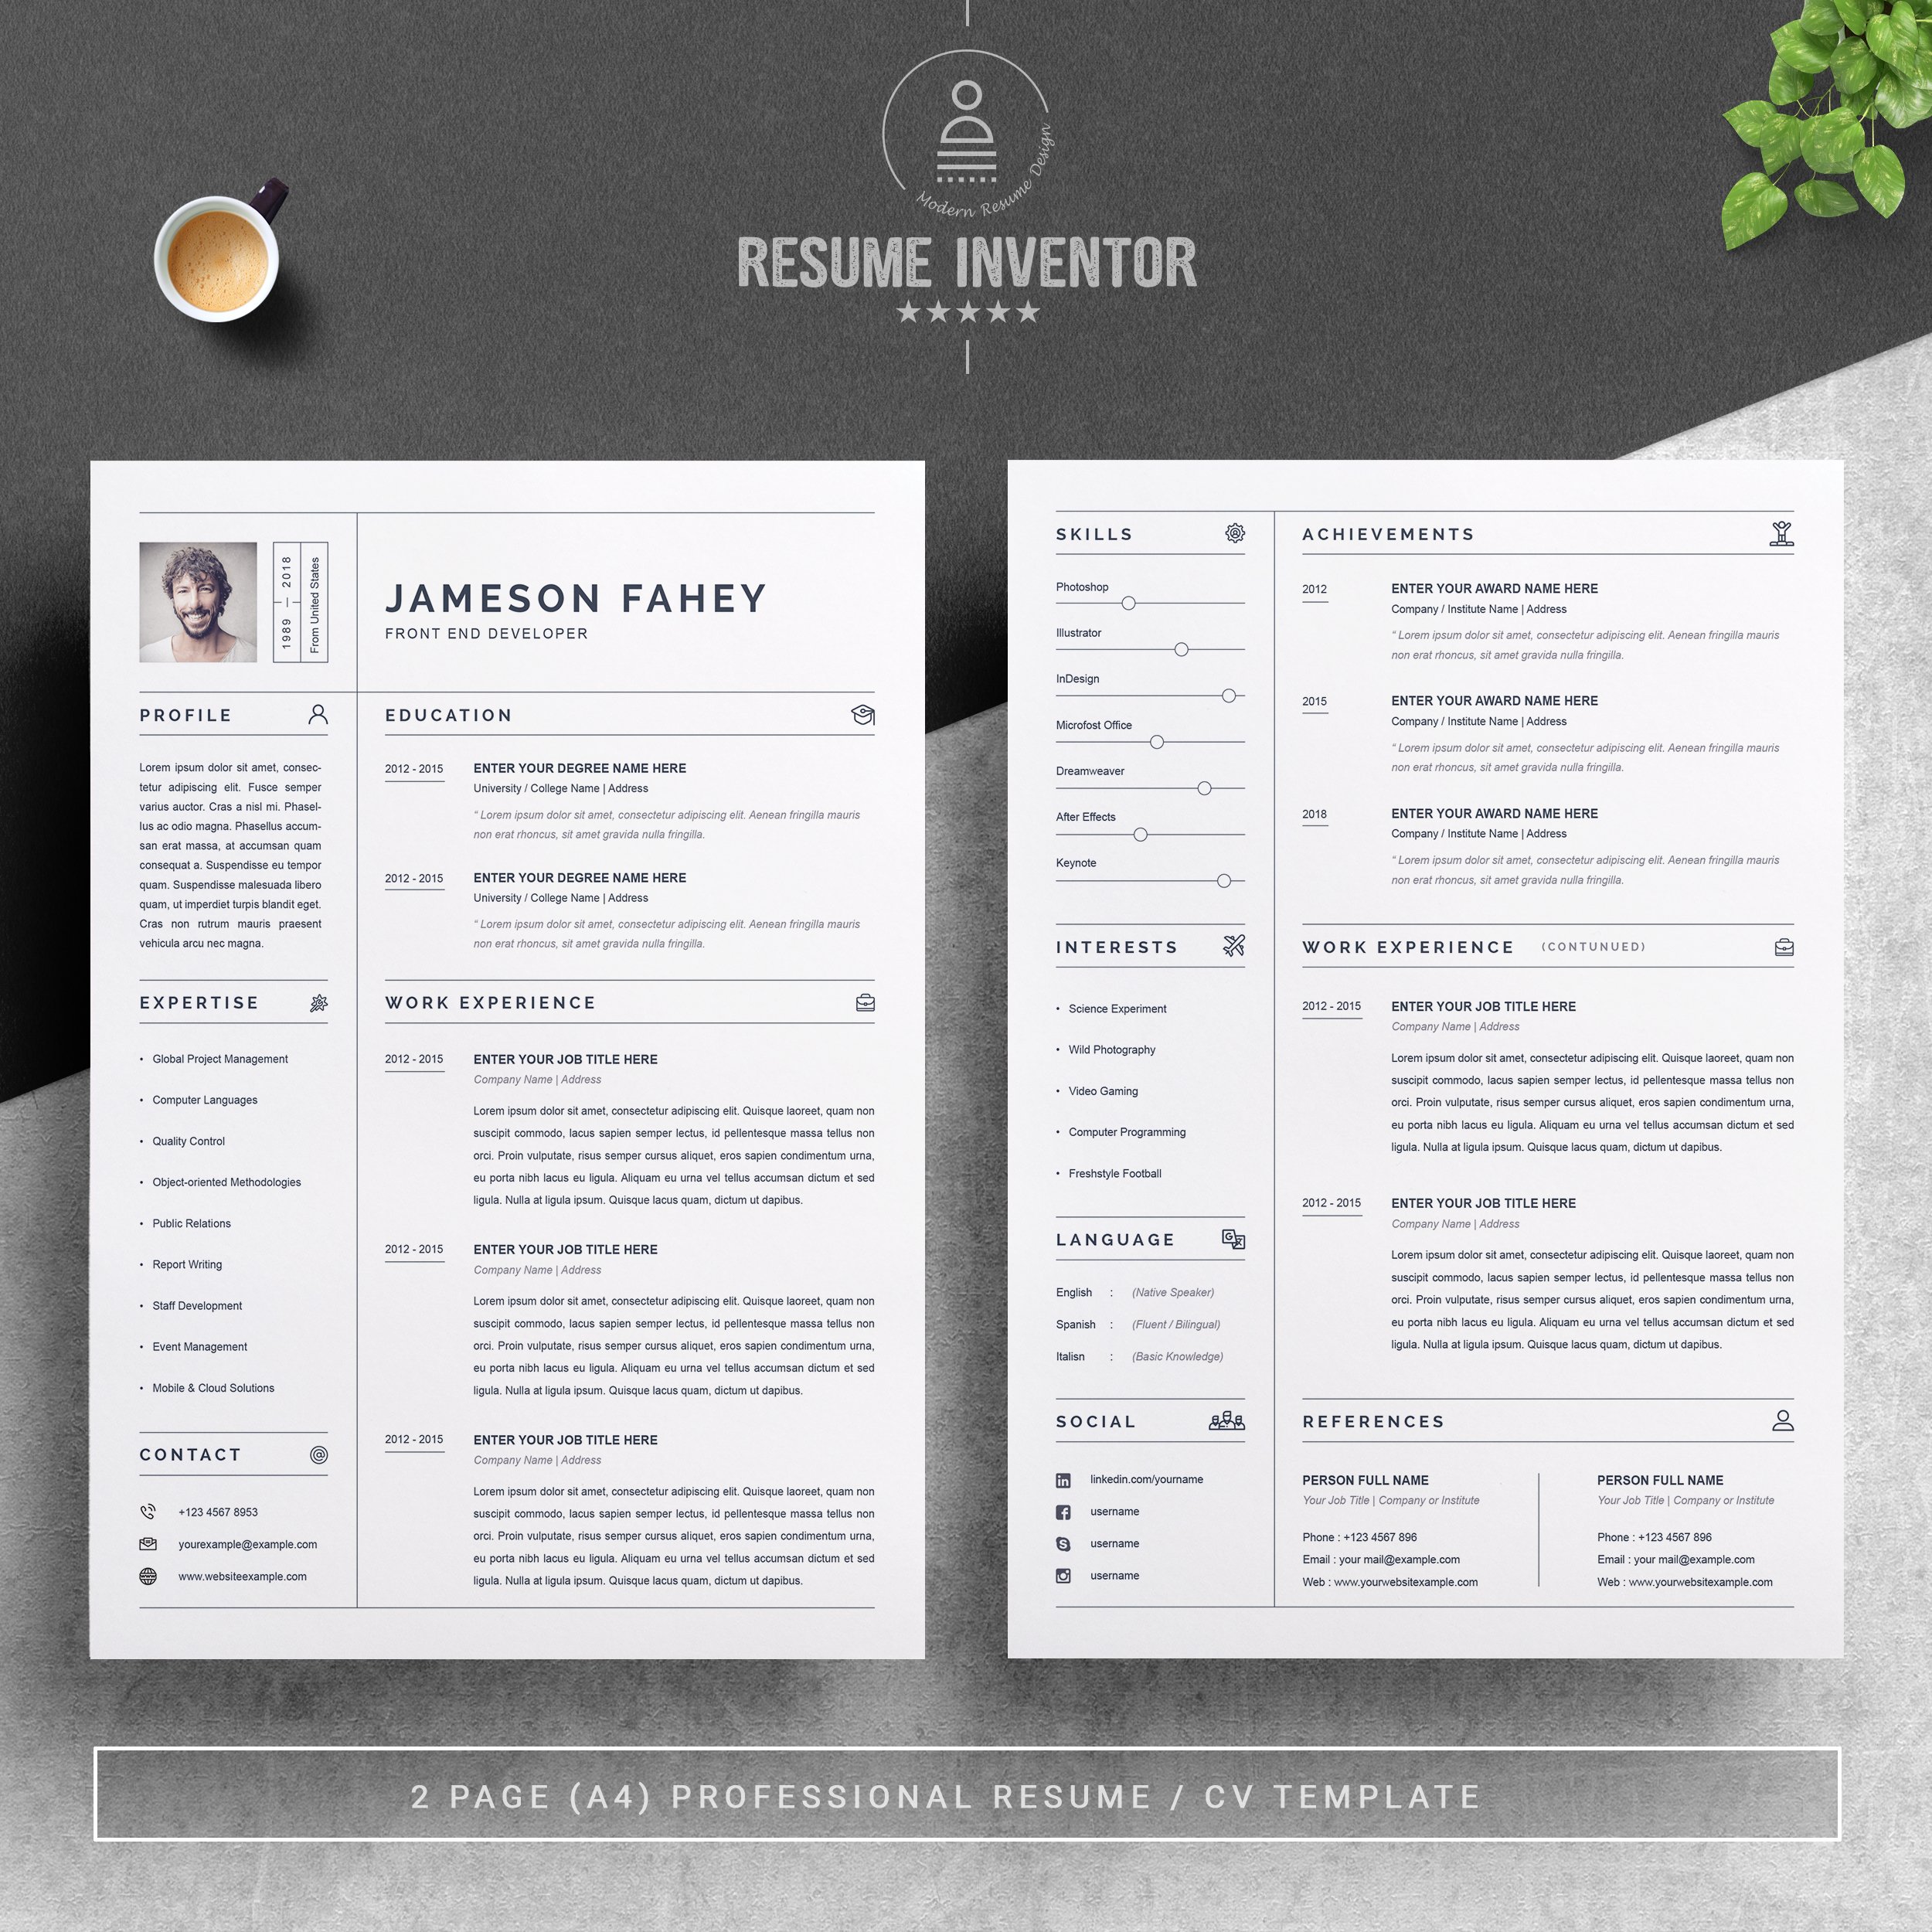 Clean Resume / CV Template preview image.